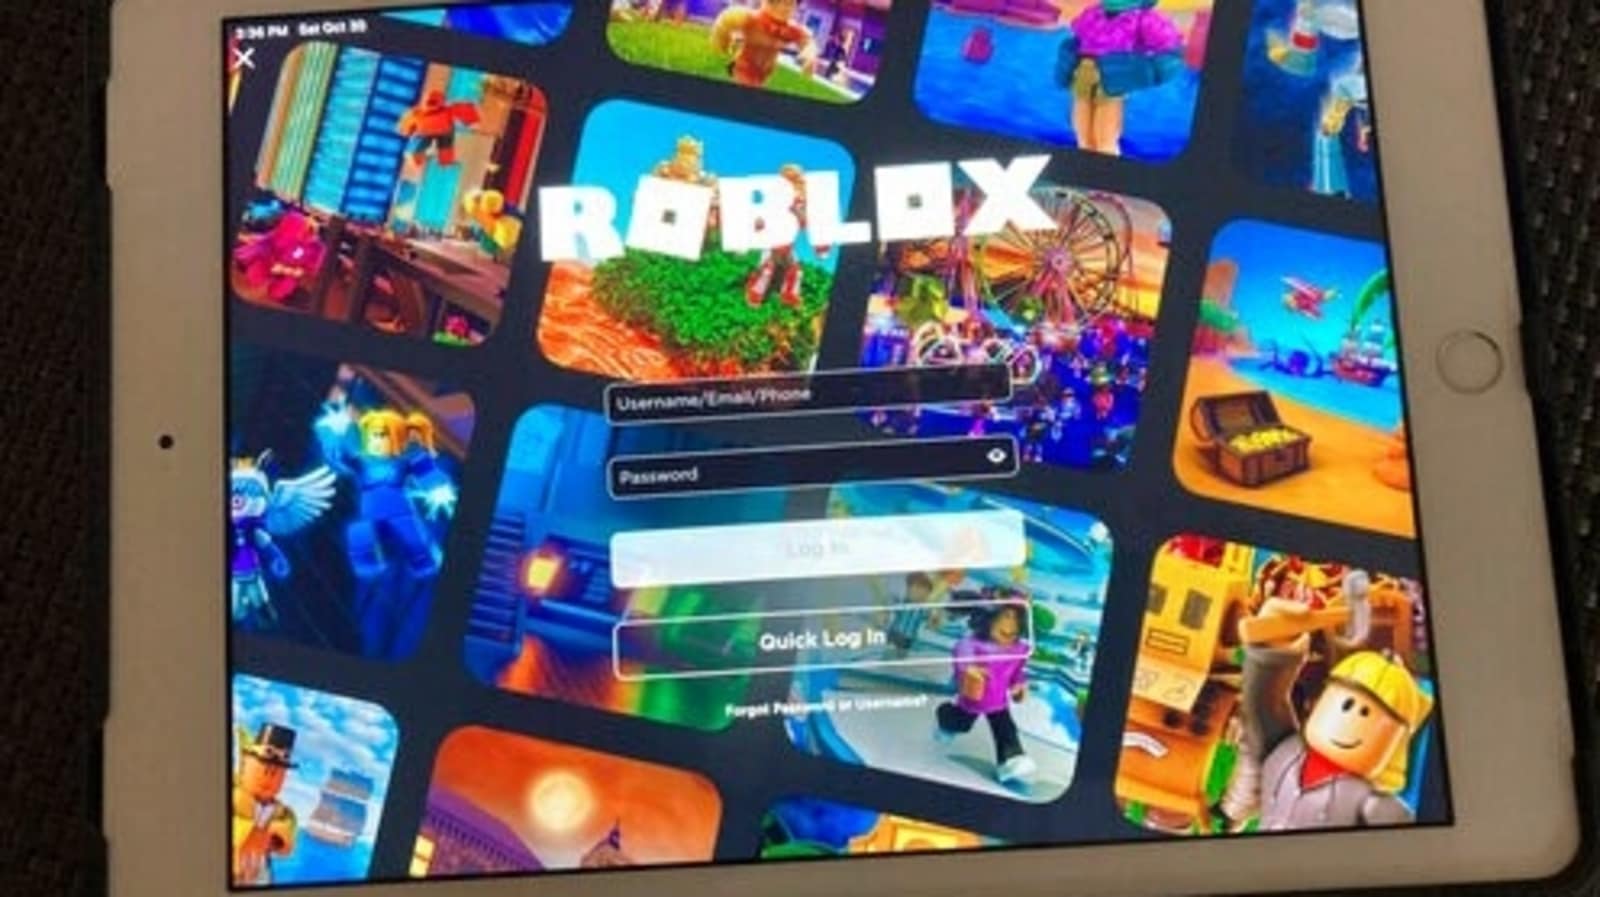 Roblox Inspires Fortnite and Other Game Companies to Let Players